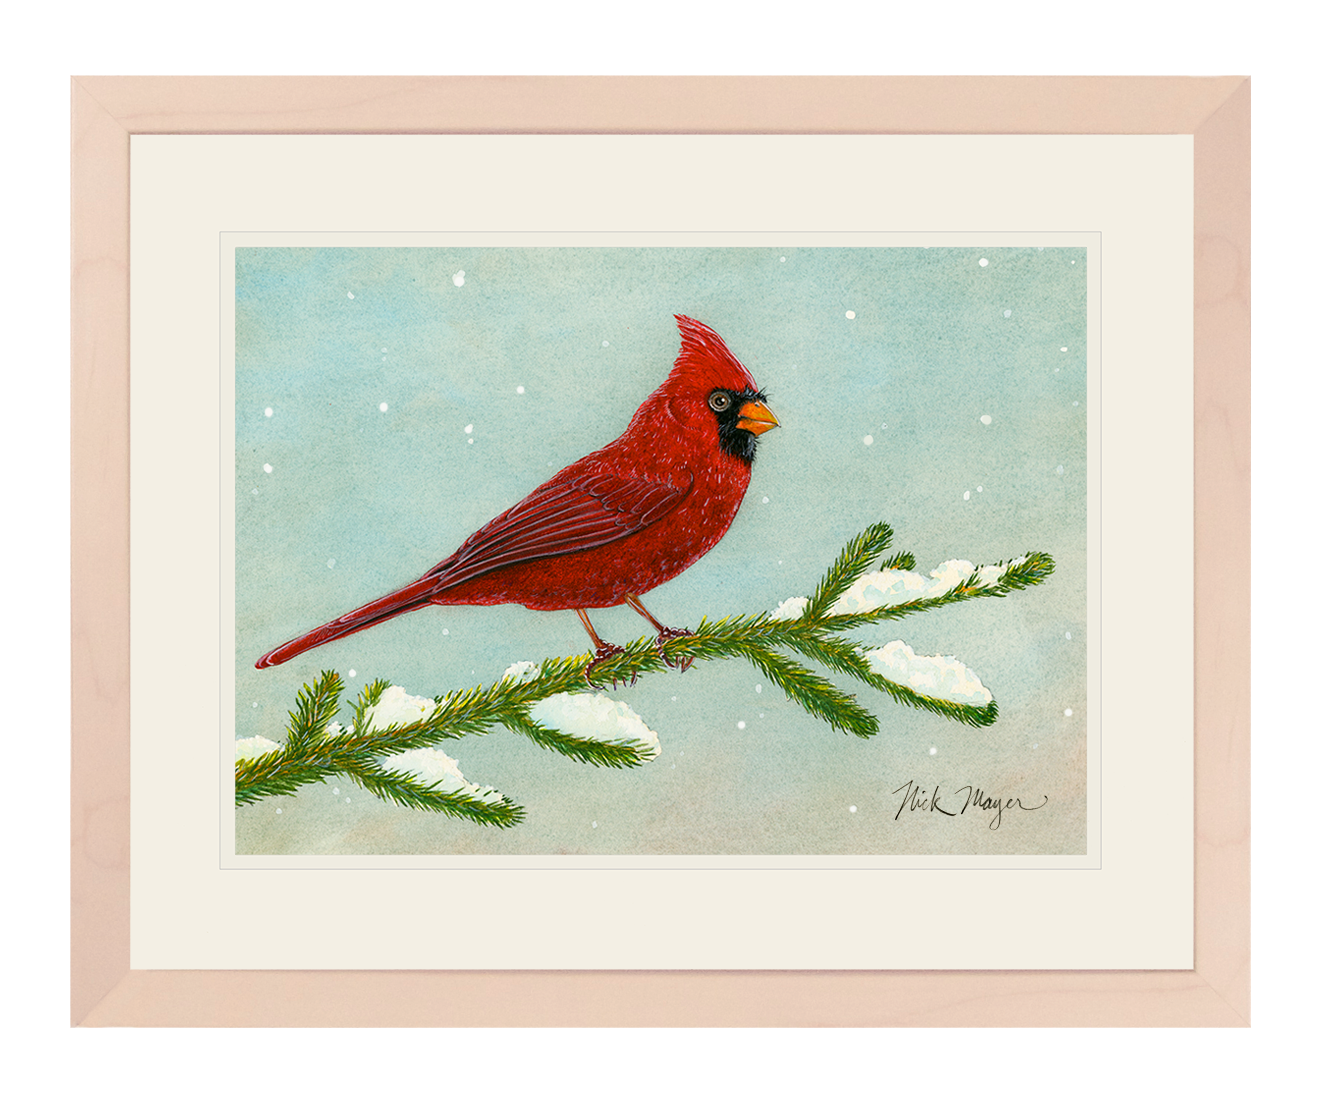 SNOWY CARDINAL: 11" x 14" FRAMED IN WHITEWASHED WOOD, 1 AVAILABLE, SHIPS MONDAY 12/18/23!